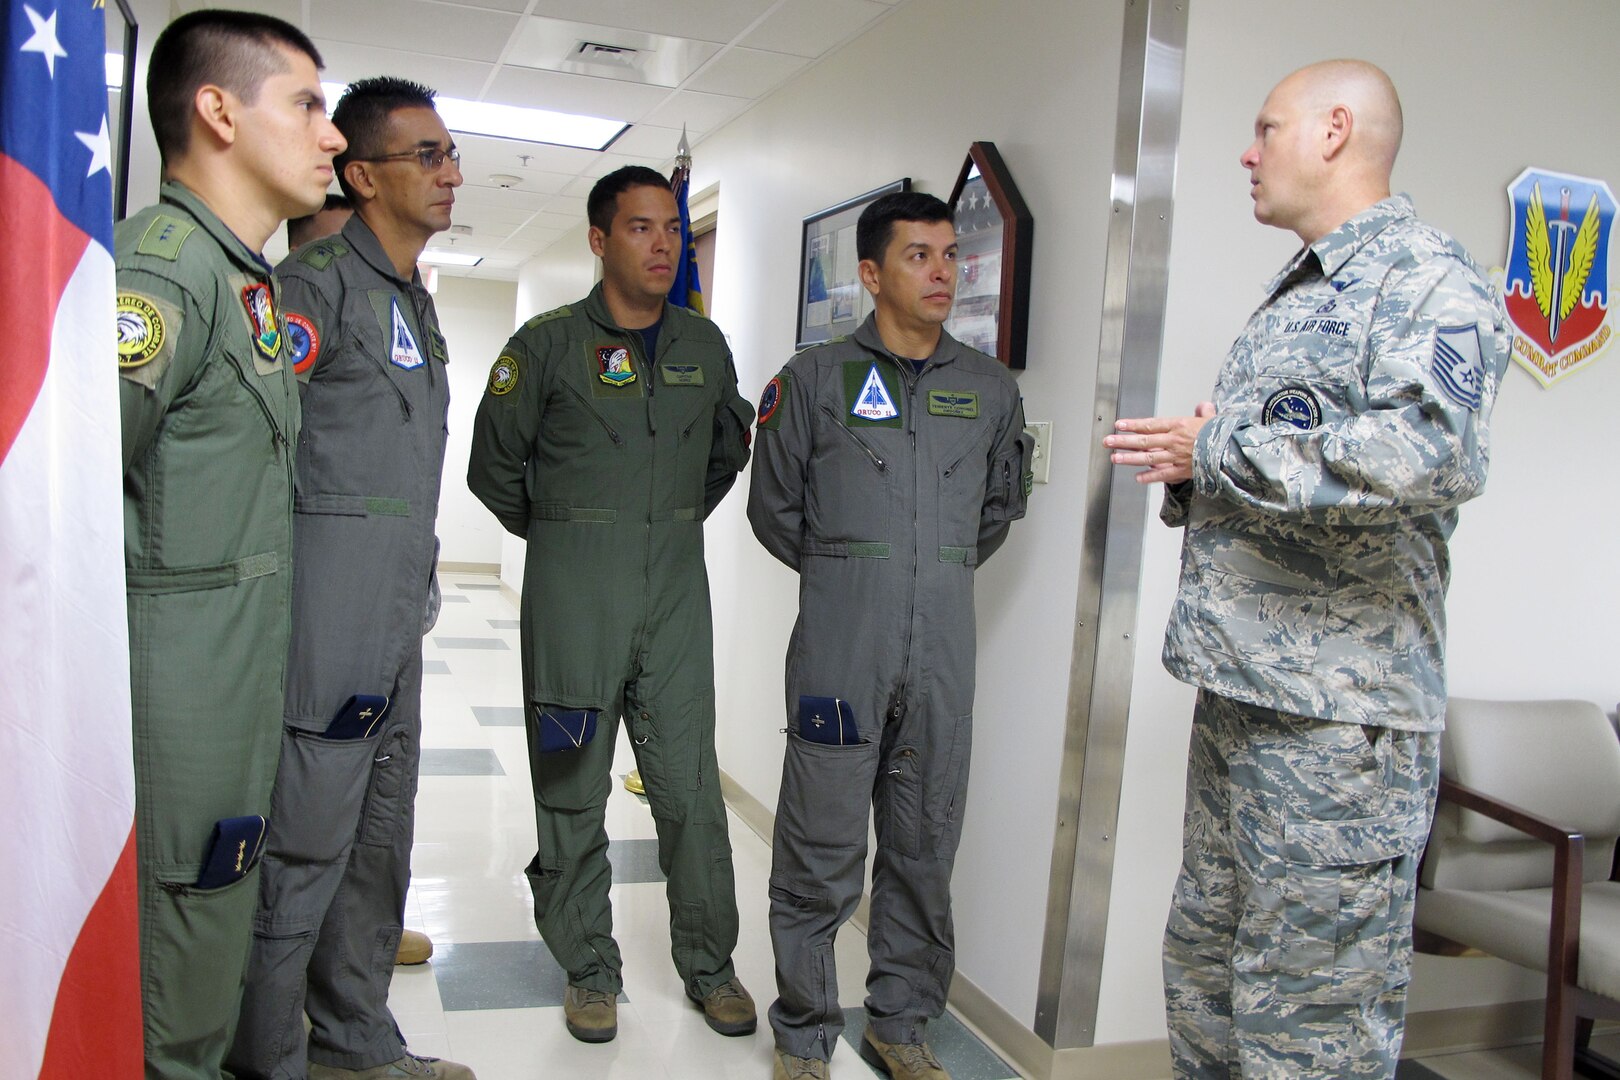 U.S. Air Force Master Sgt. Austin Blessard, Georgia Air National Guard 117th Air Control Squadron weapons and tactics non-commissioned officer in charge, introduces himself to members of the Colombian air force during a State Partnership Program Subject Matter Expert Exchange on Ground Control Intercept with the Georgia Air National Guard, May 30-June 2, 2017, at Hunter Army Airfield in Savannah, Georgia. 